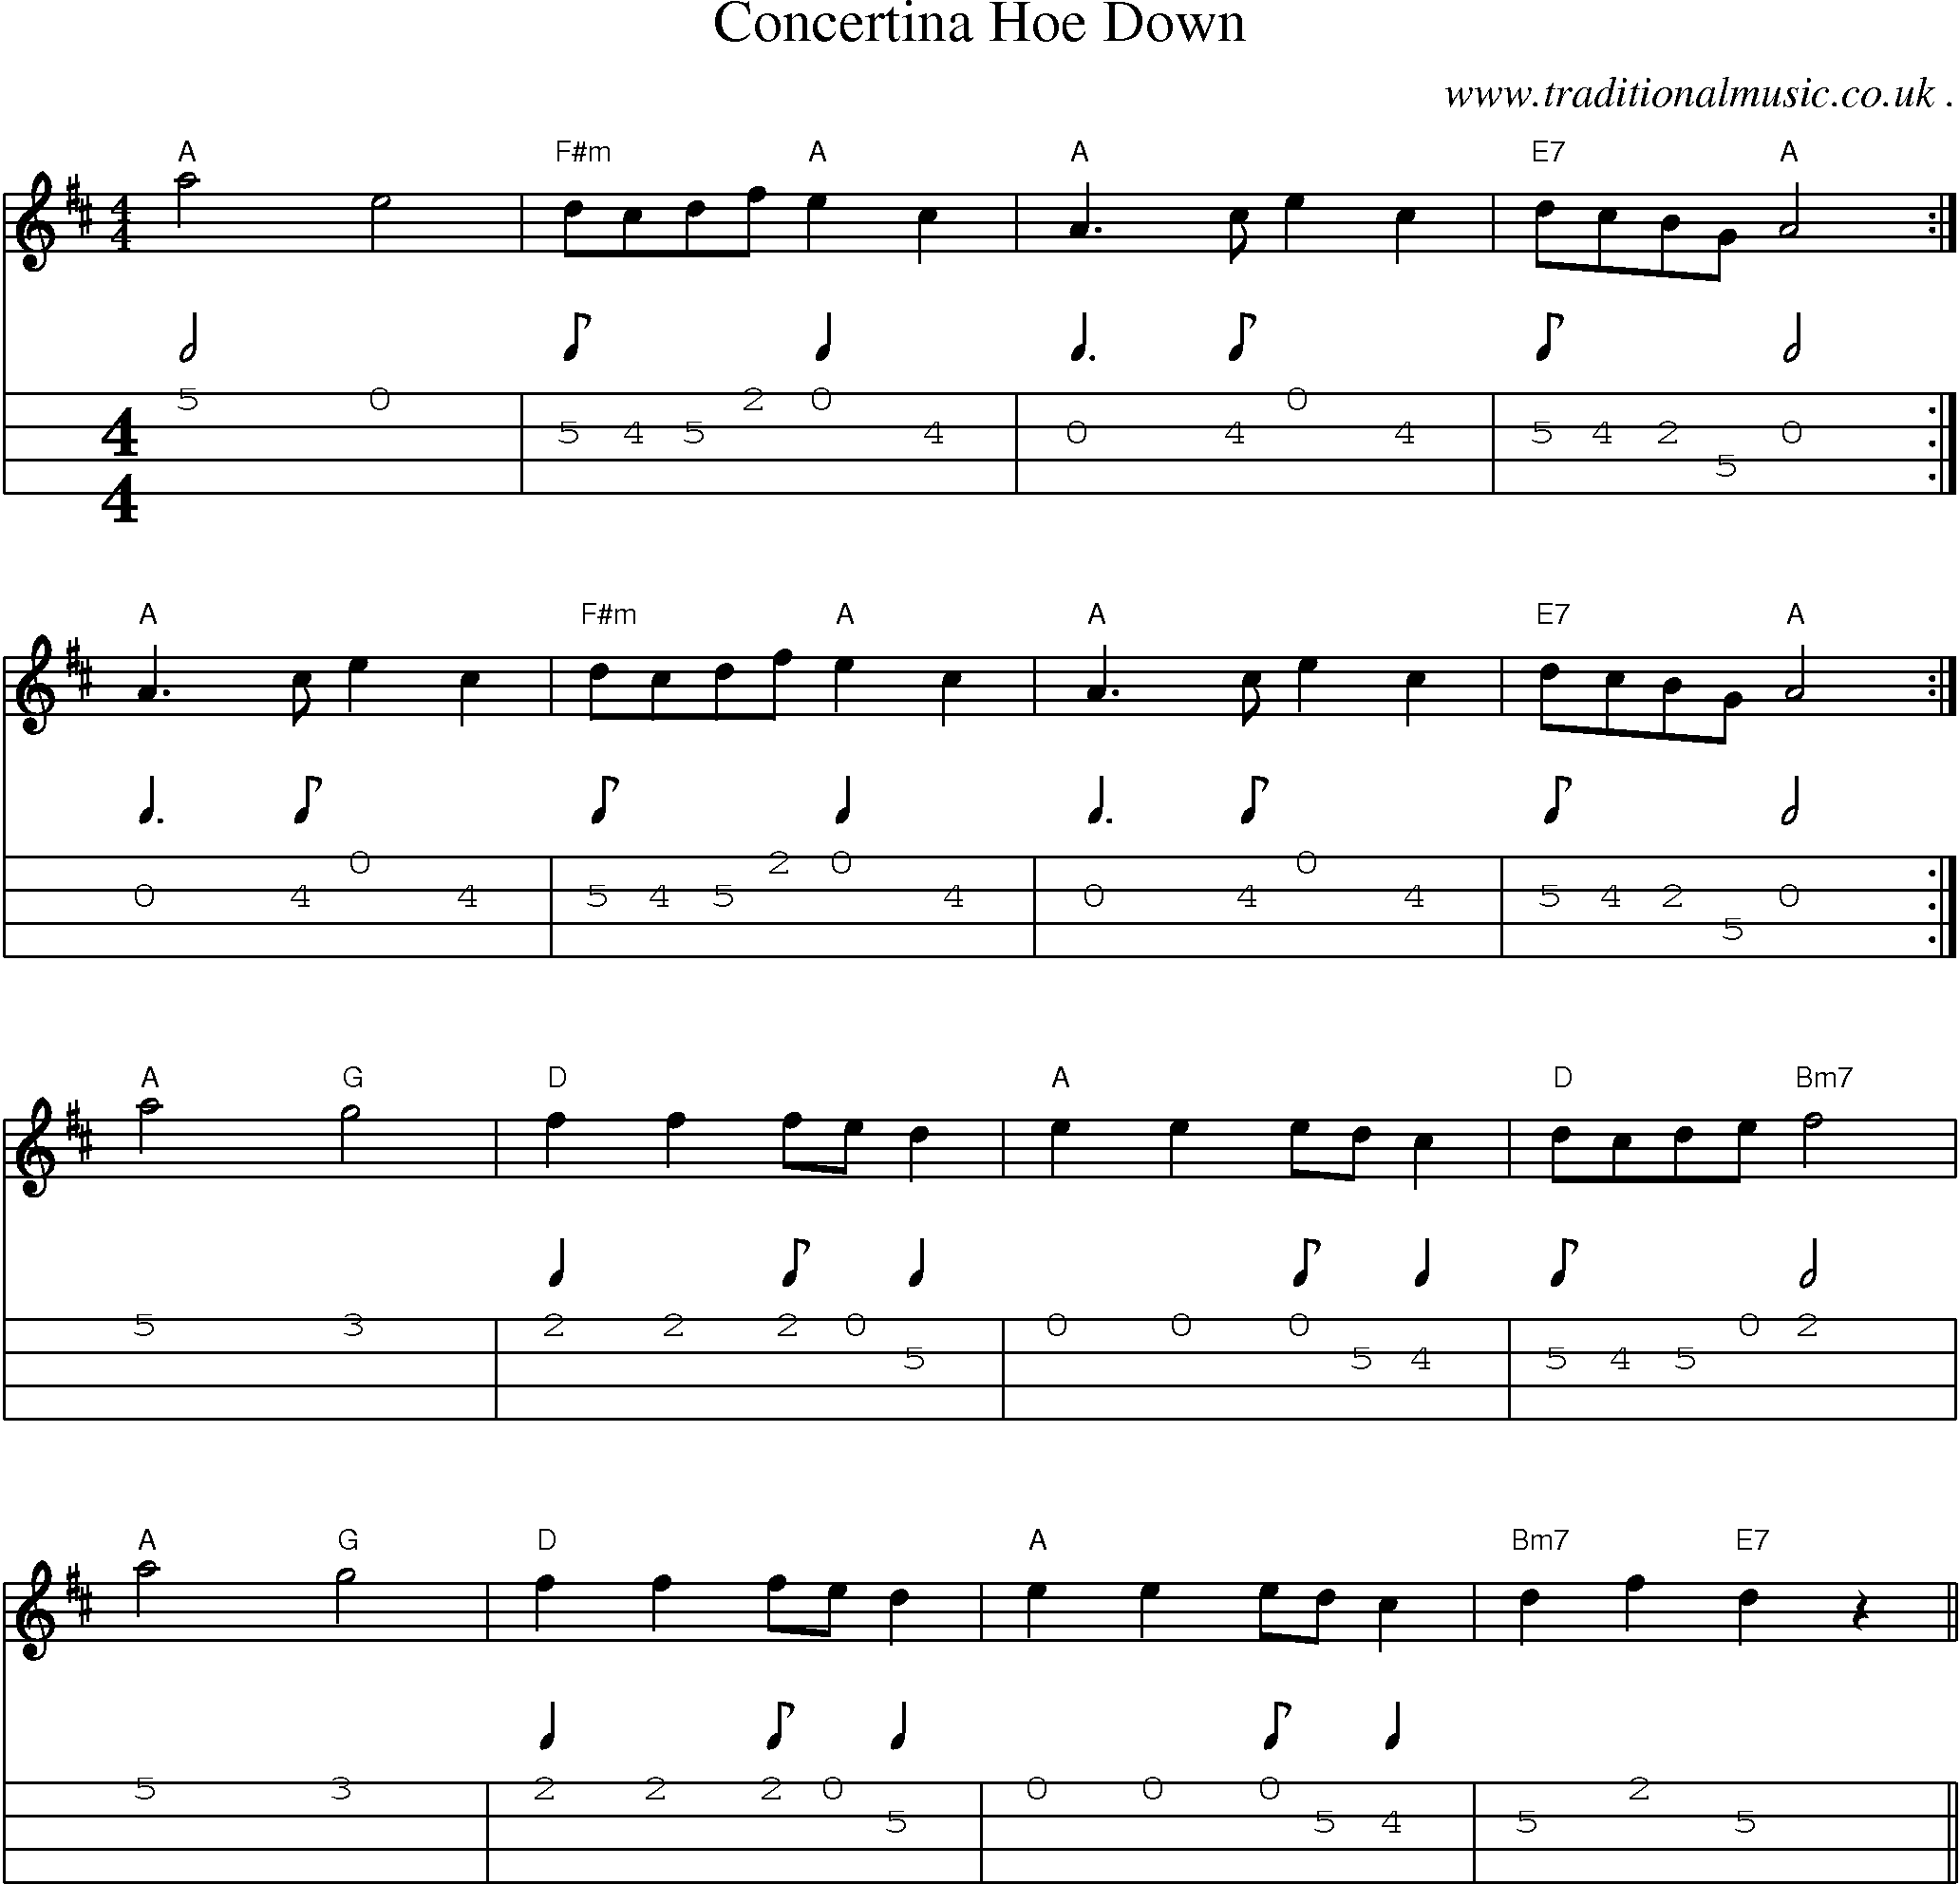 Sheet-Music and Mandolin Tabs for Concertina Hoe Down